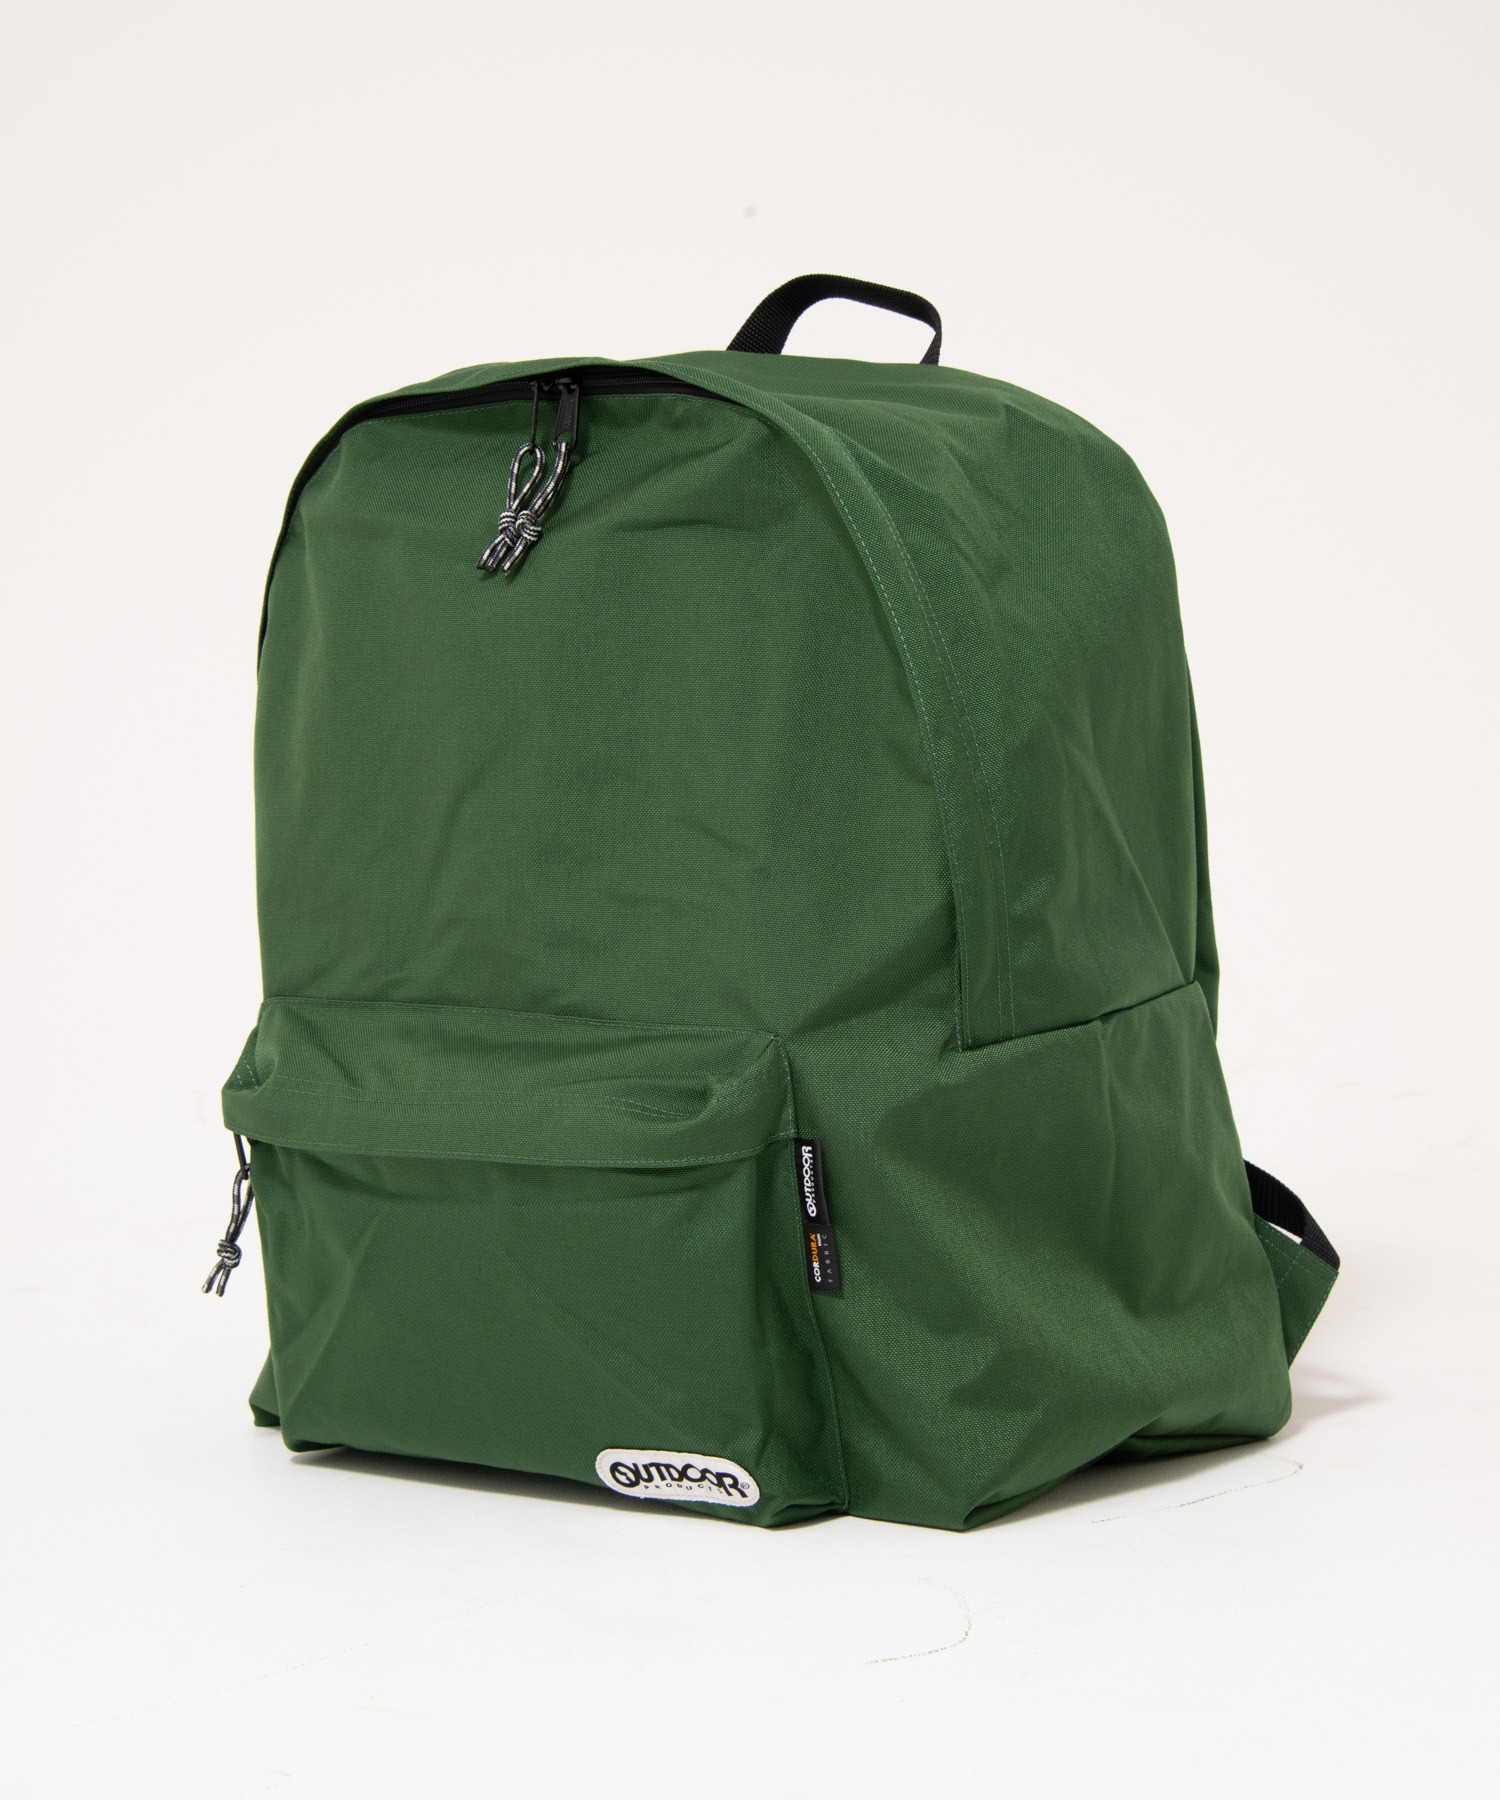 452r Giant ナイロンデイパック 57 2l コーデュラナイロン仕様 Outdoor Products アウトドアプロダクツ Outdoor Products 公式通販サイト